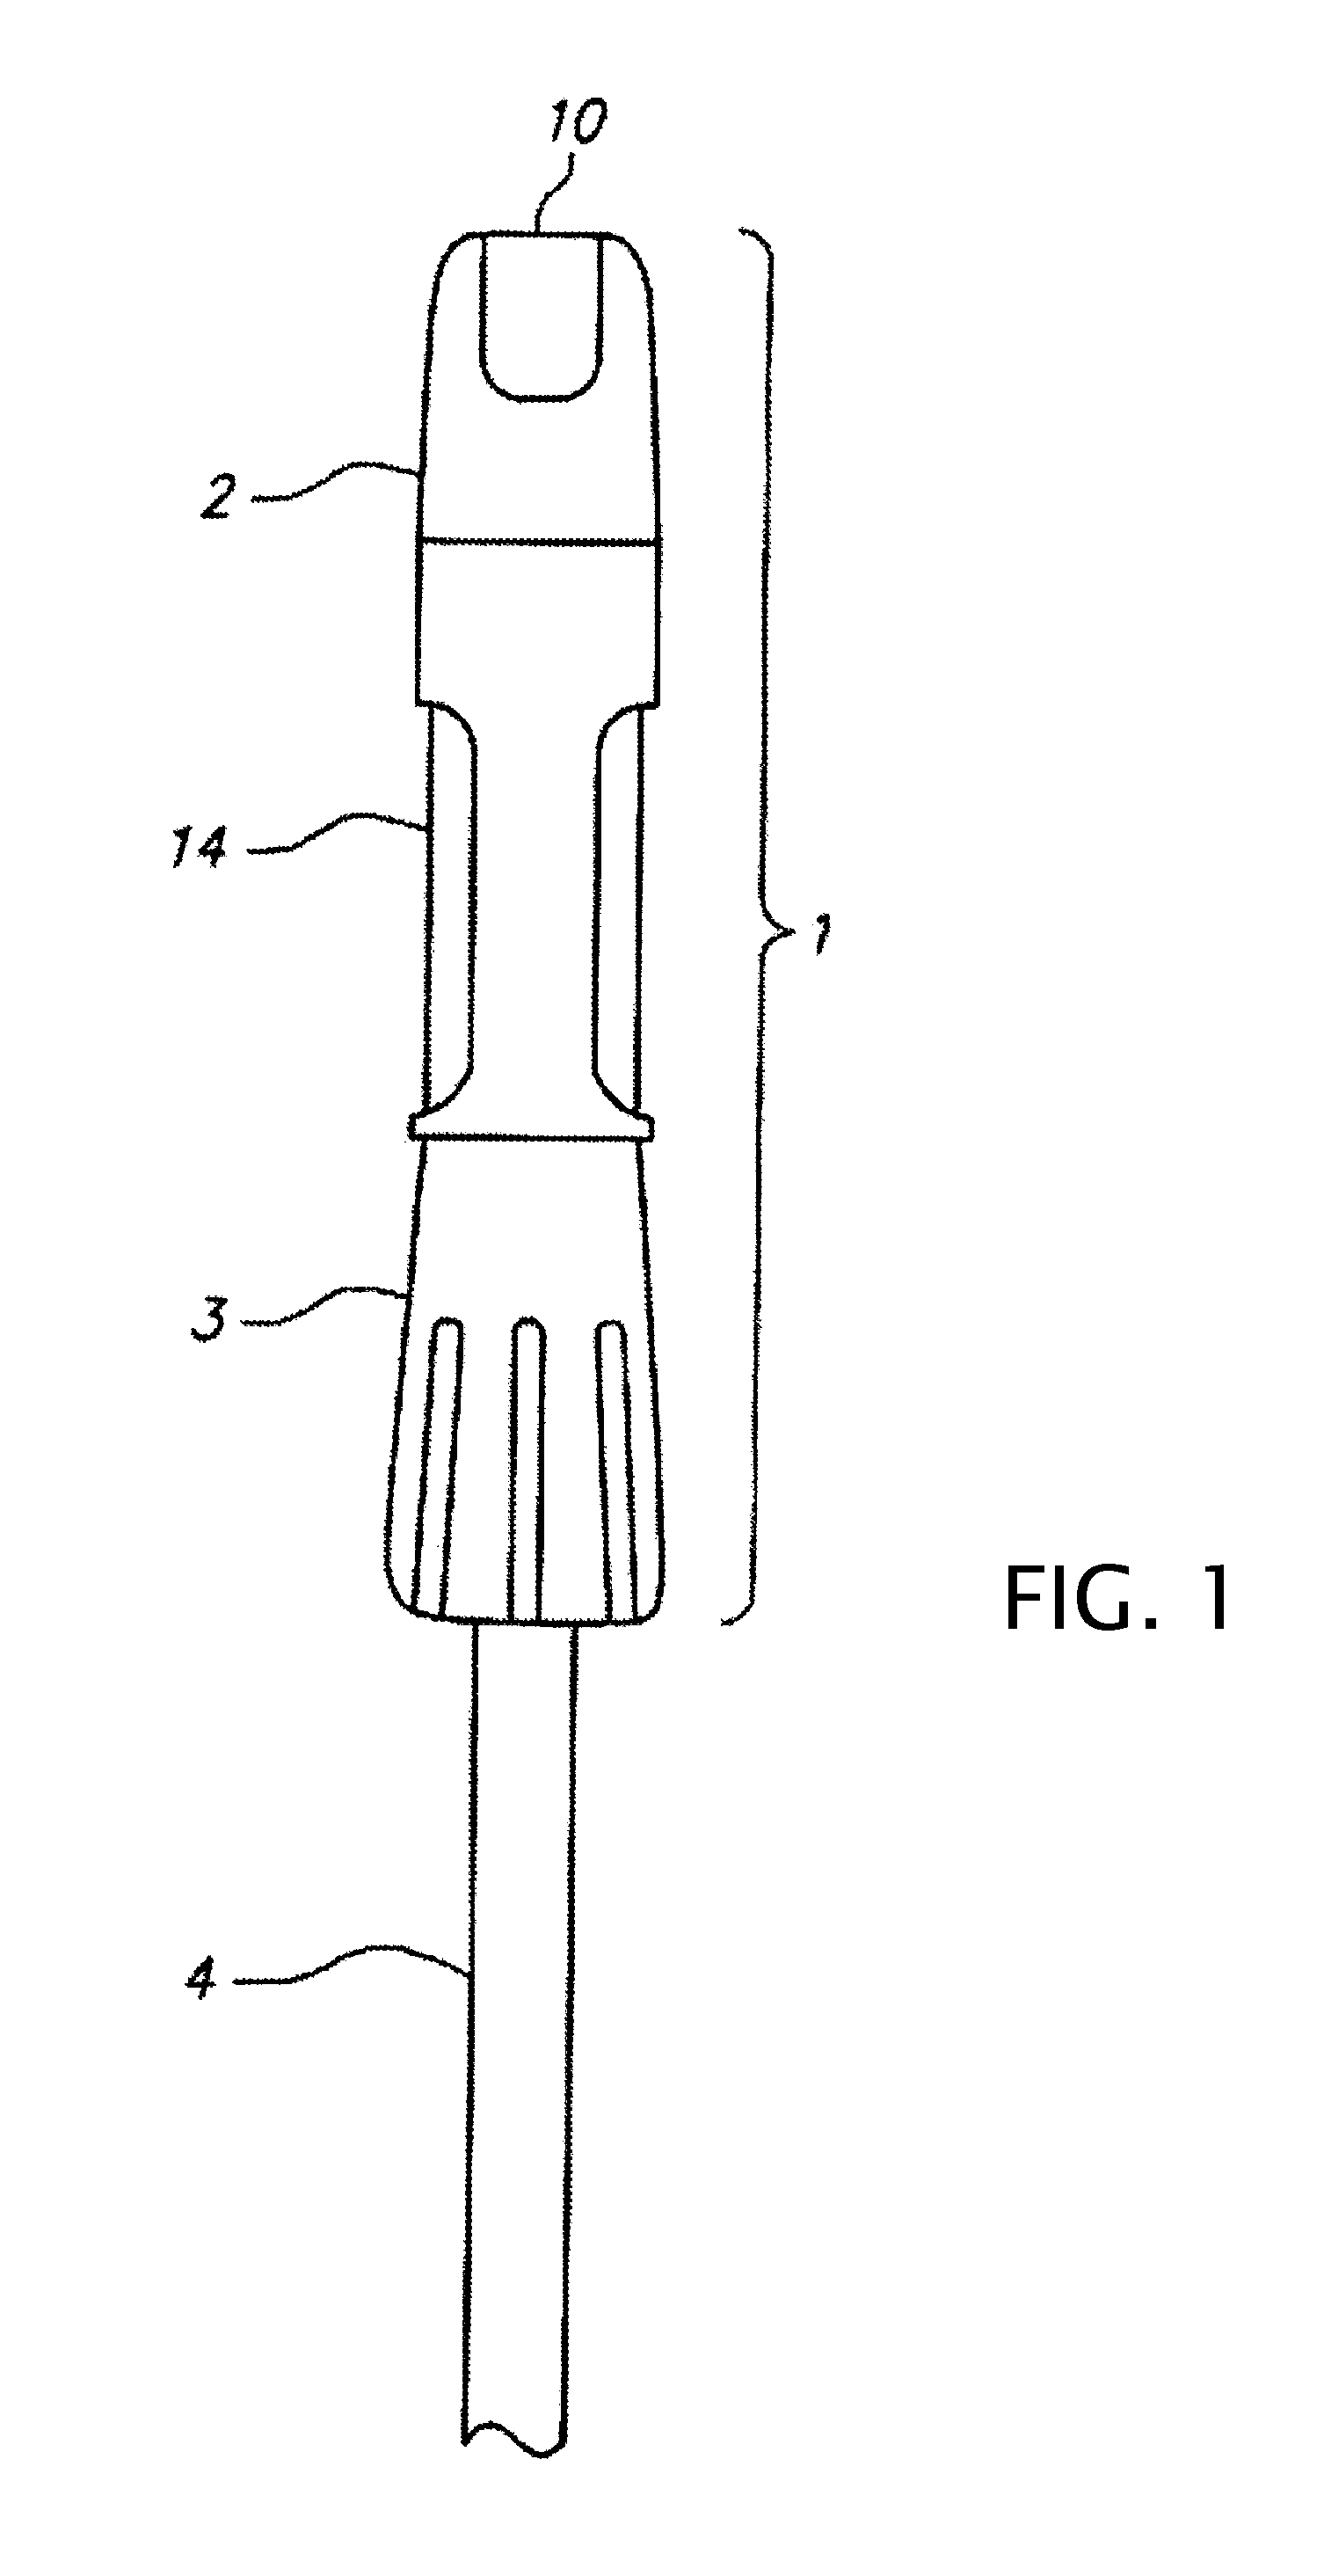 User wearable device for carrying peritoneal dialysis catheter